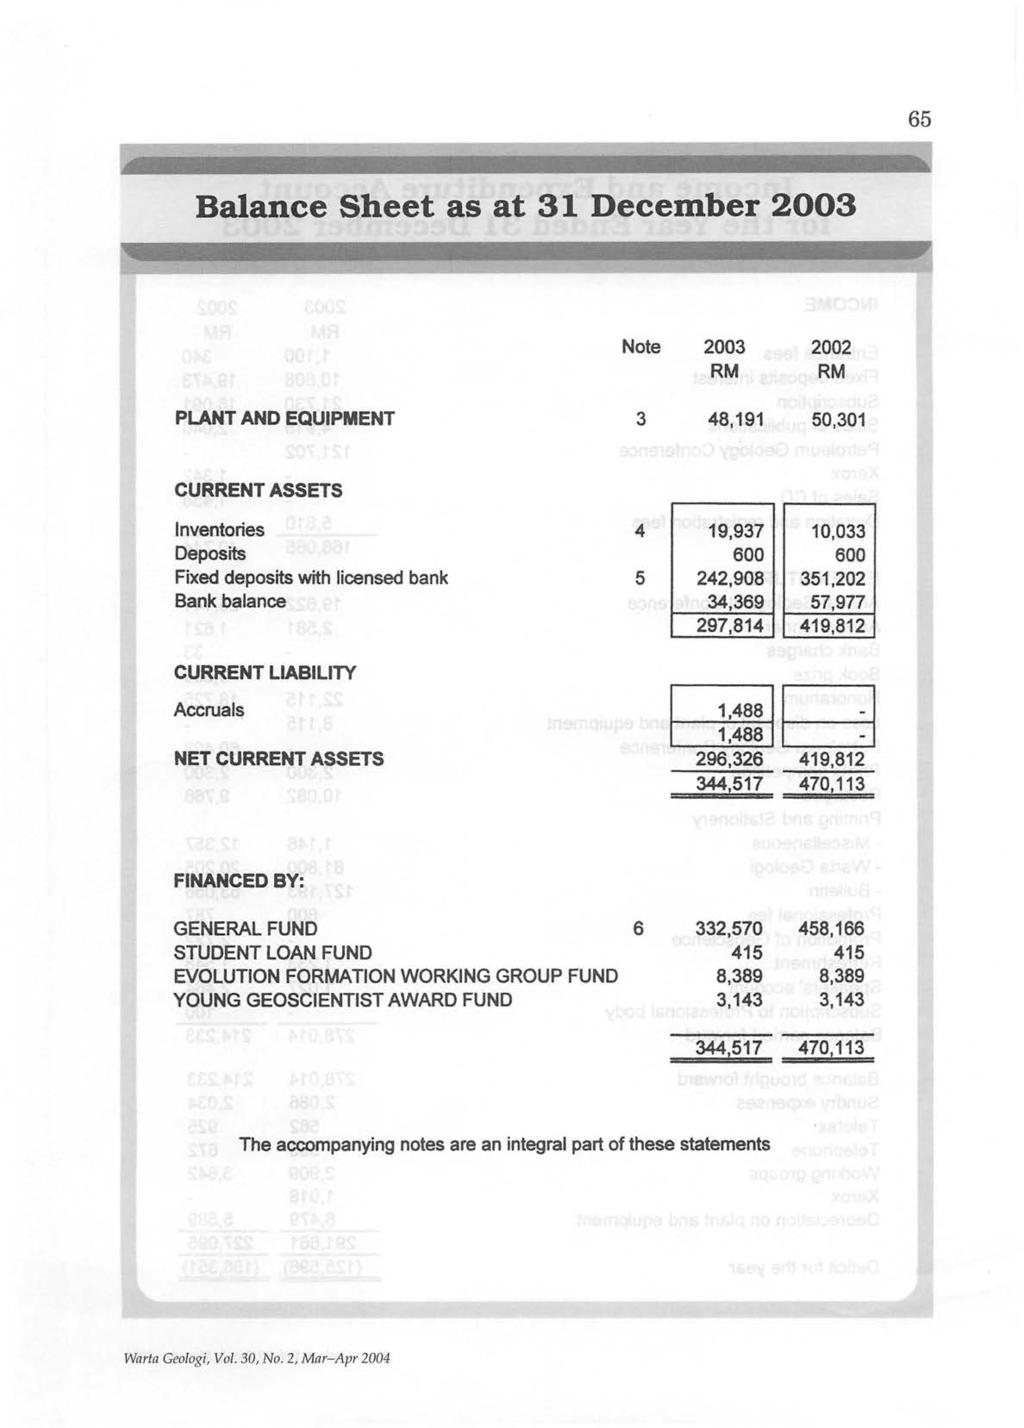 65 Balance Sheet as at 31 December 2003 Note 2003 RM 2002 RM PLANT AND EQUIPMENT 3 48,191 50,301 CURRENT ASSETS Inventories Deposits Fixed deposits with licensed bank Bank balance 4 5 19,937 600